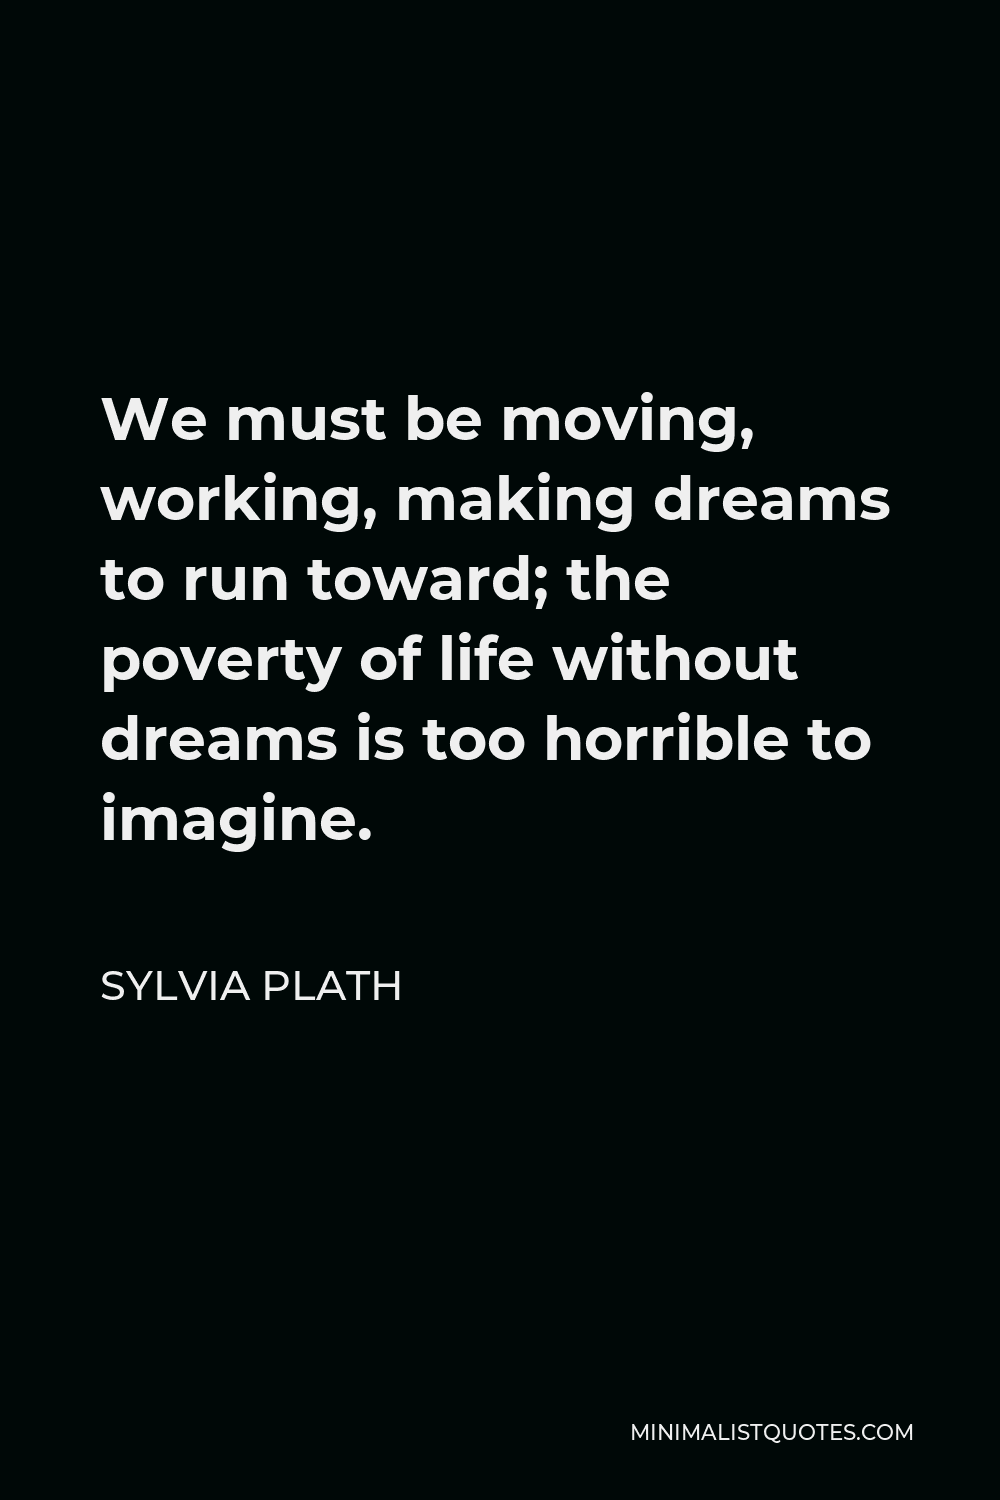 Sylvia Plath Quote - We must be moving, working, making dreams to run toward; the poverty of life without dreams is too horrible to imagine.